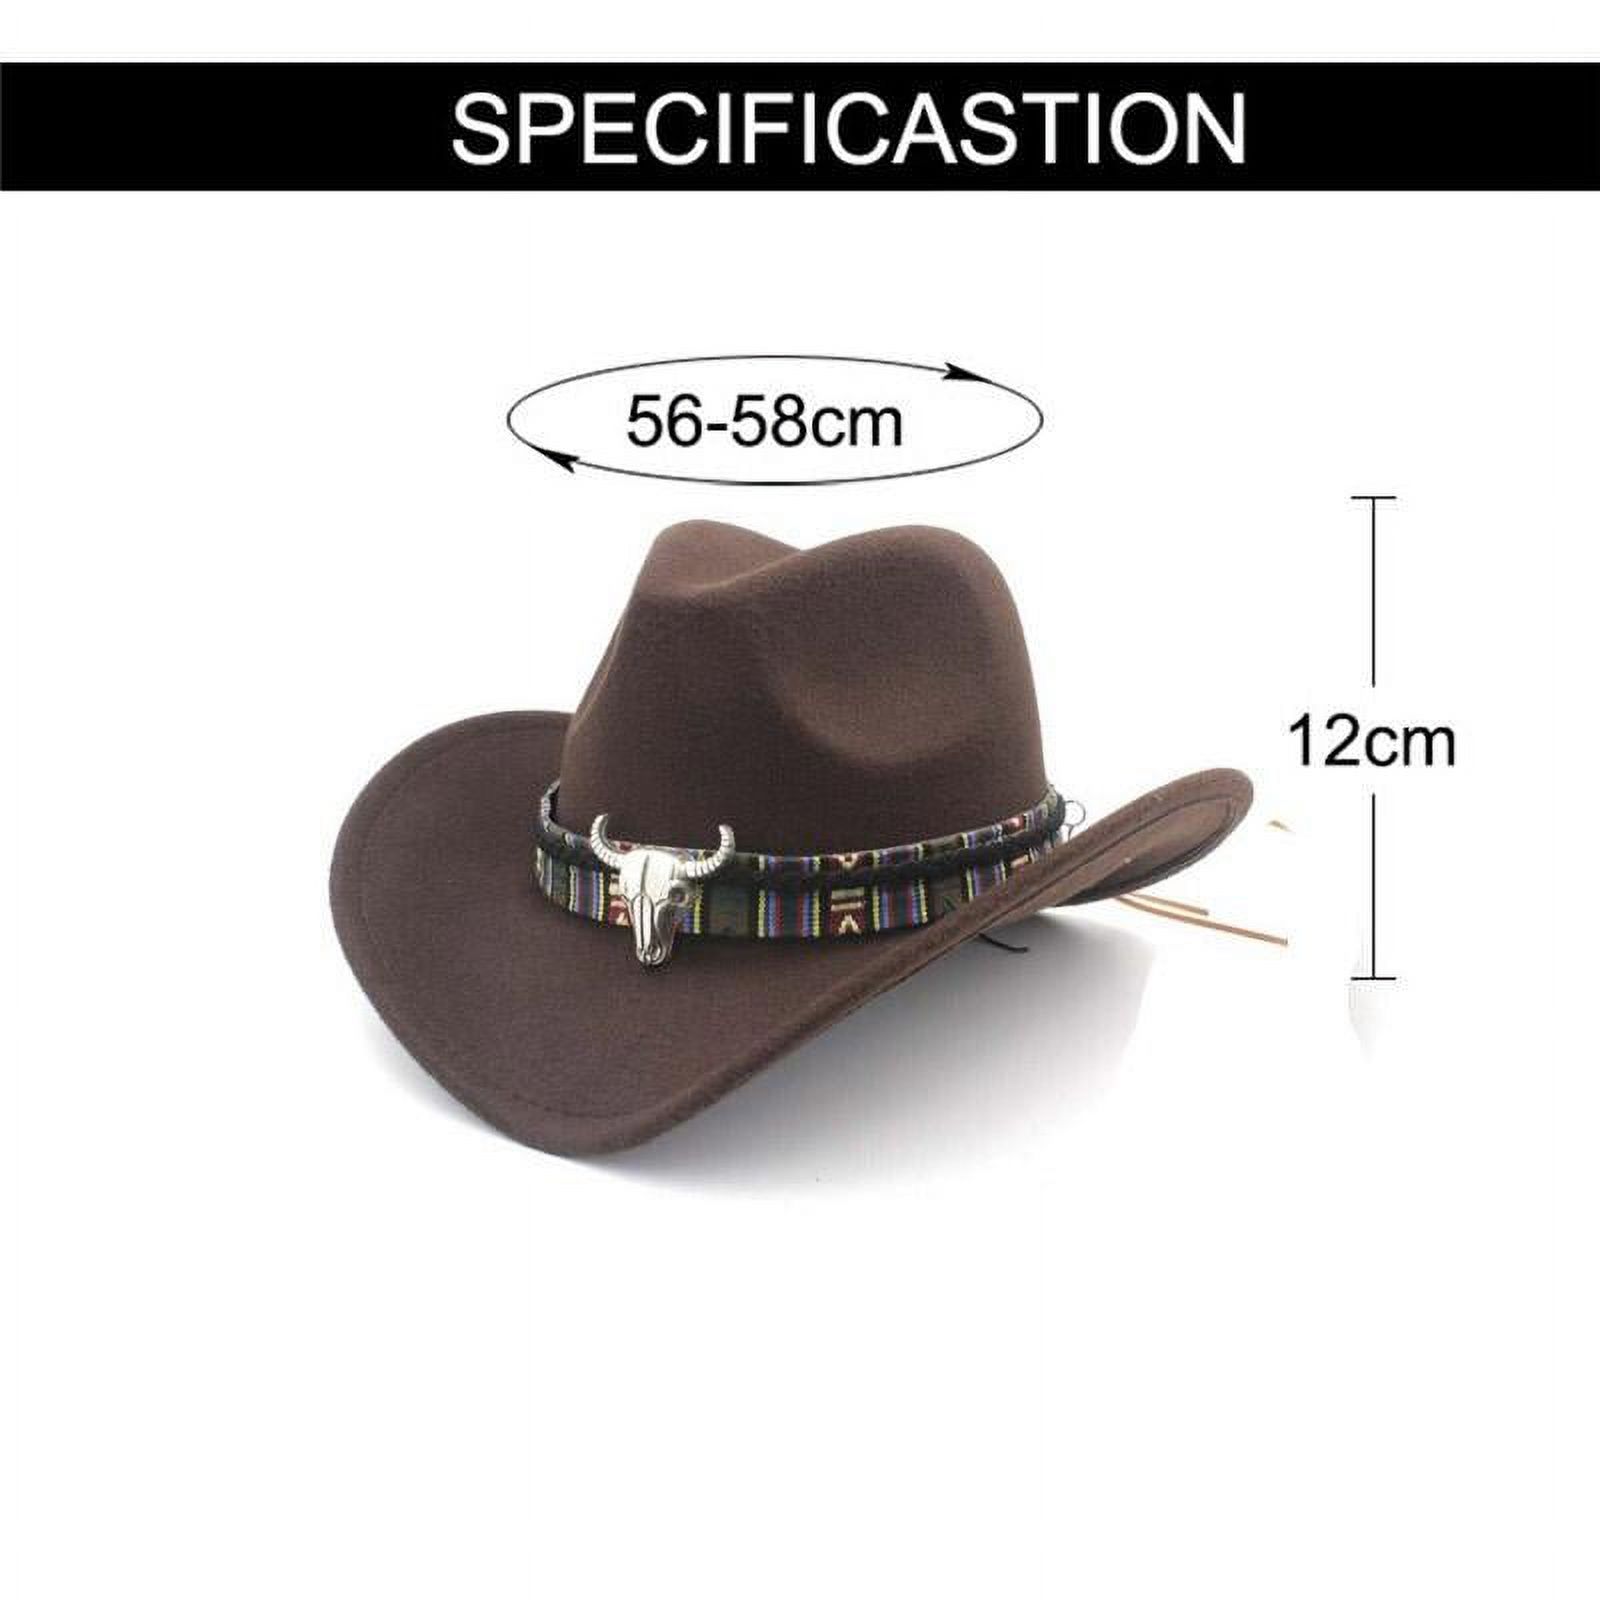 New Ethnic Style Western Cowboy Hat Women's Wool Hat Jazz Hat Western Cowboy Hat Wine Red - image 3 of 3